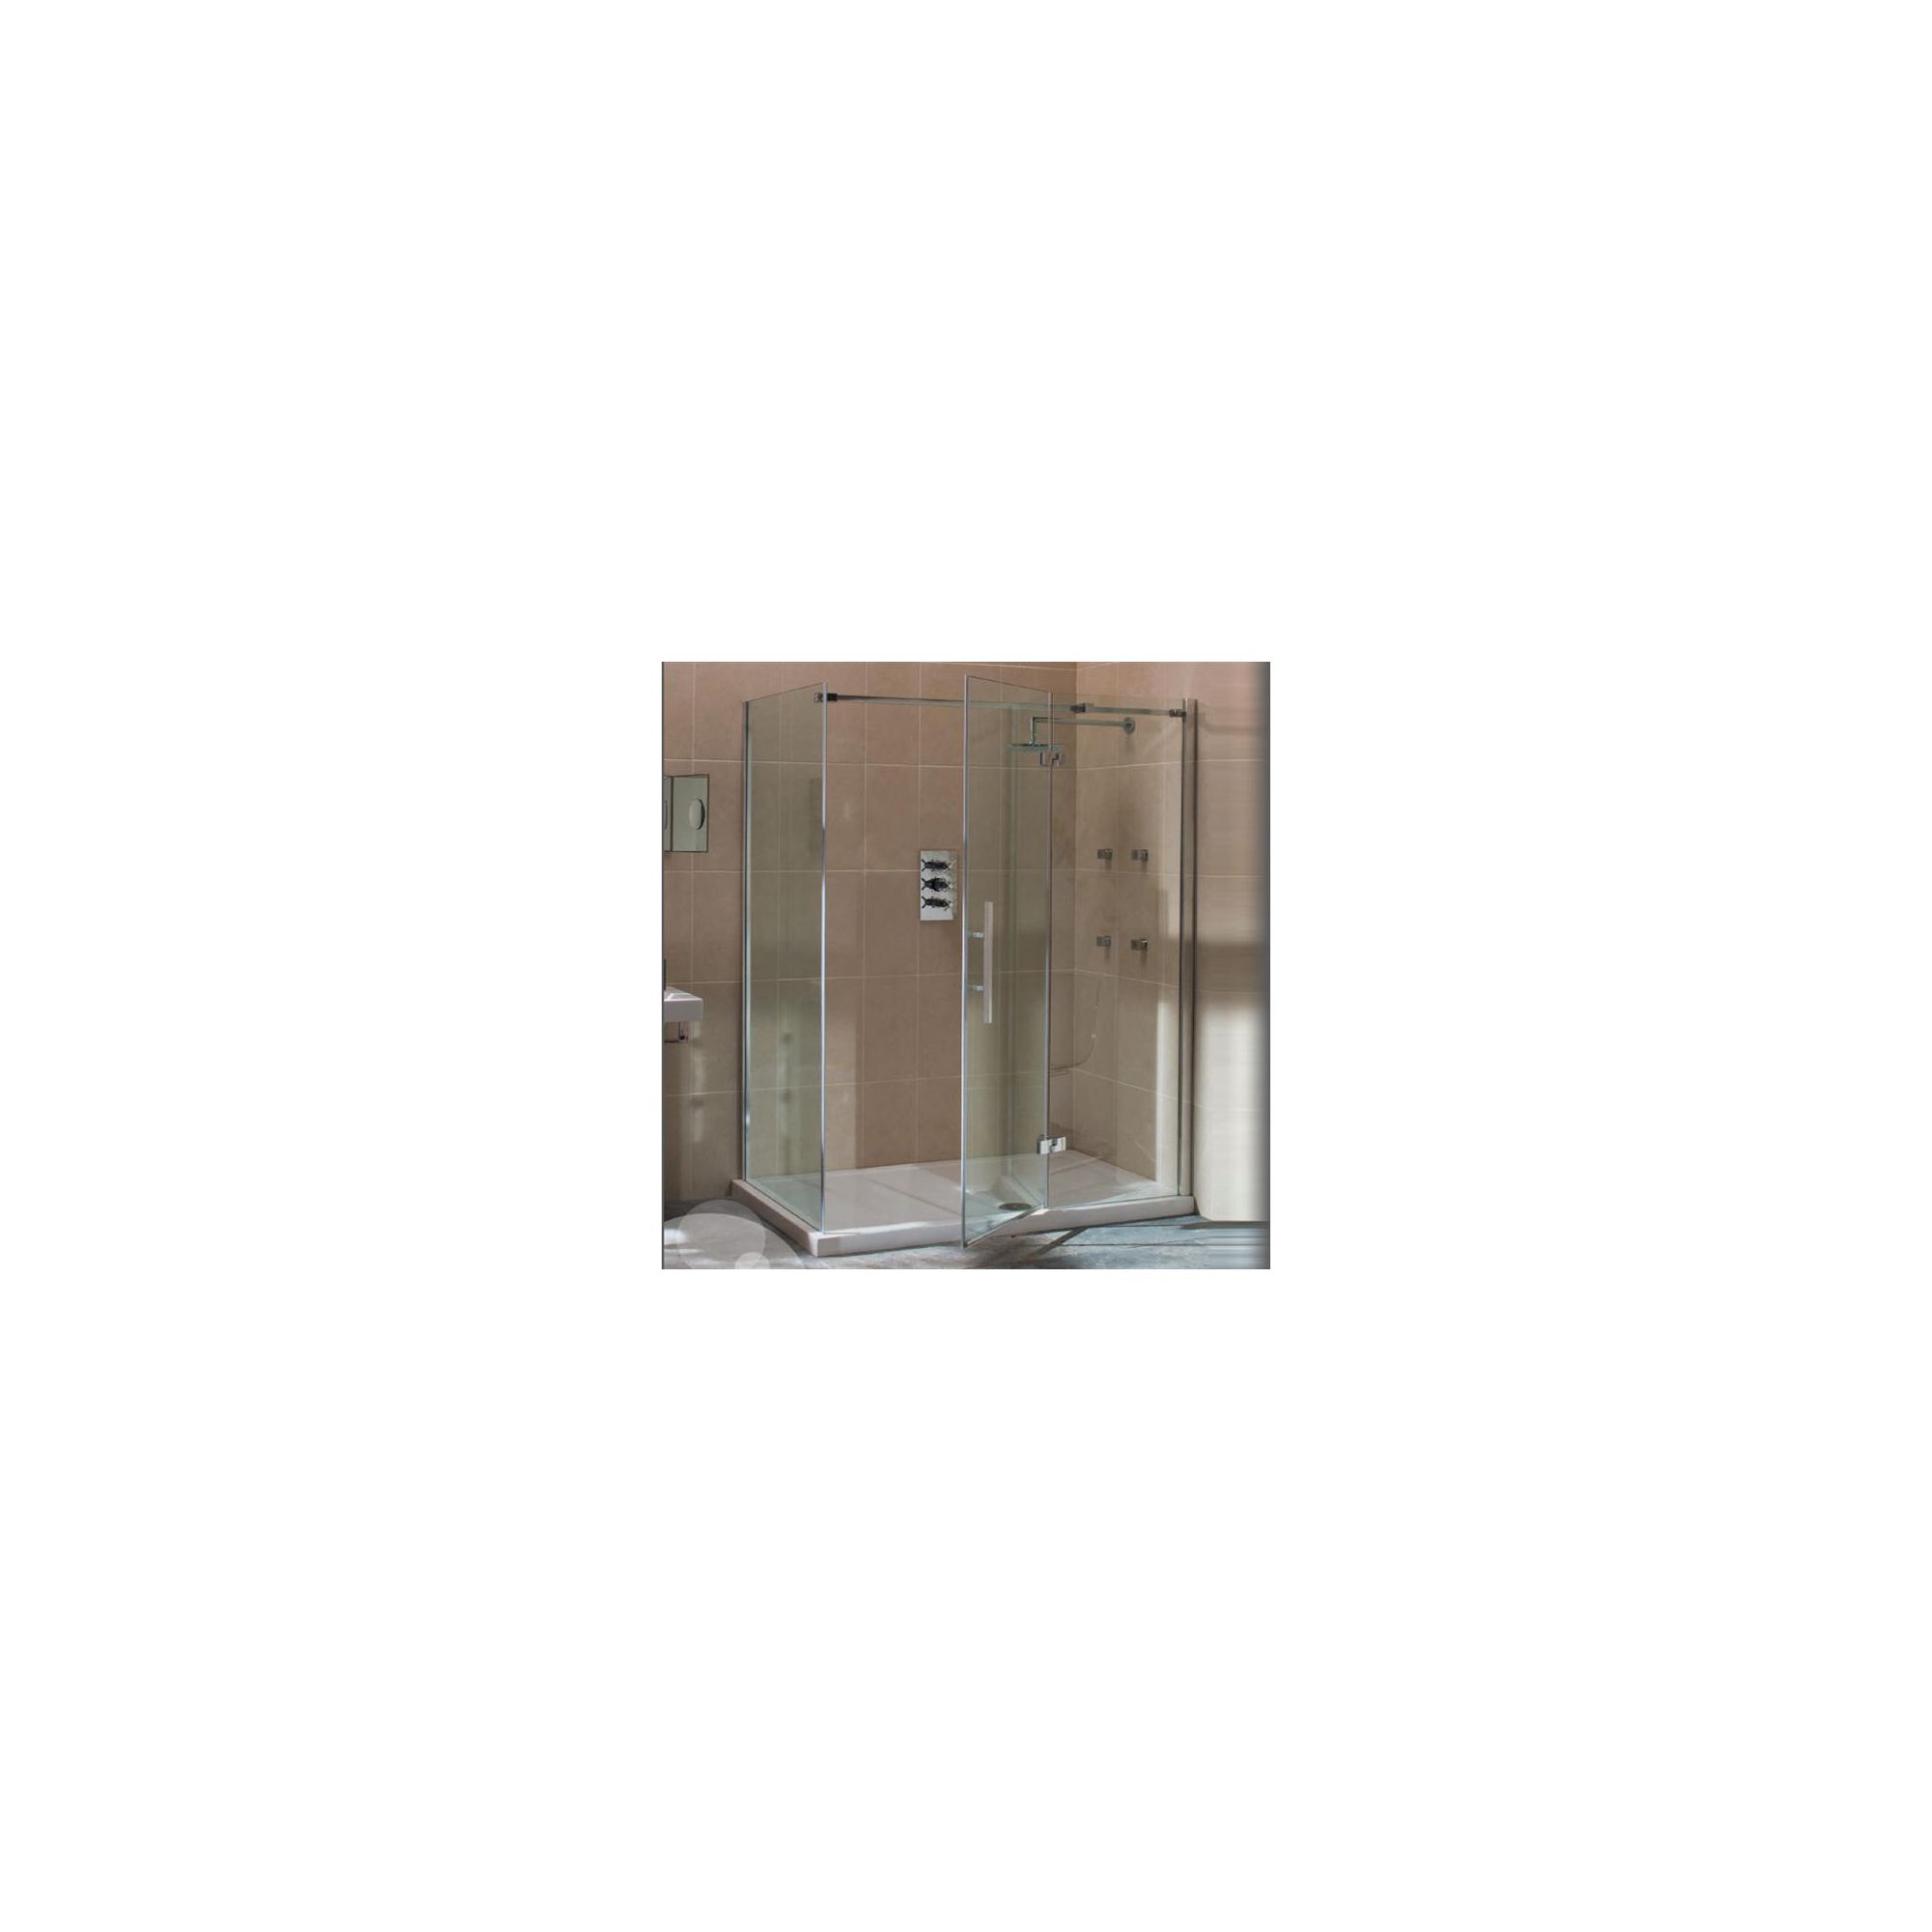 Merlyn Vivid Nine Hinged Door Shower Enclosure with Inline Panel, 1100mm x 800mm, Right Handed, Low Profile Tray, 8mm Glass at Tesco Direct